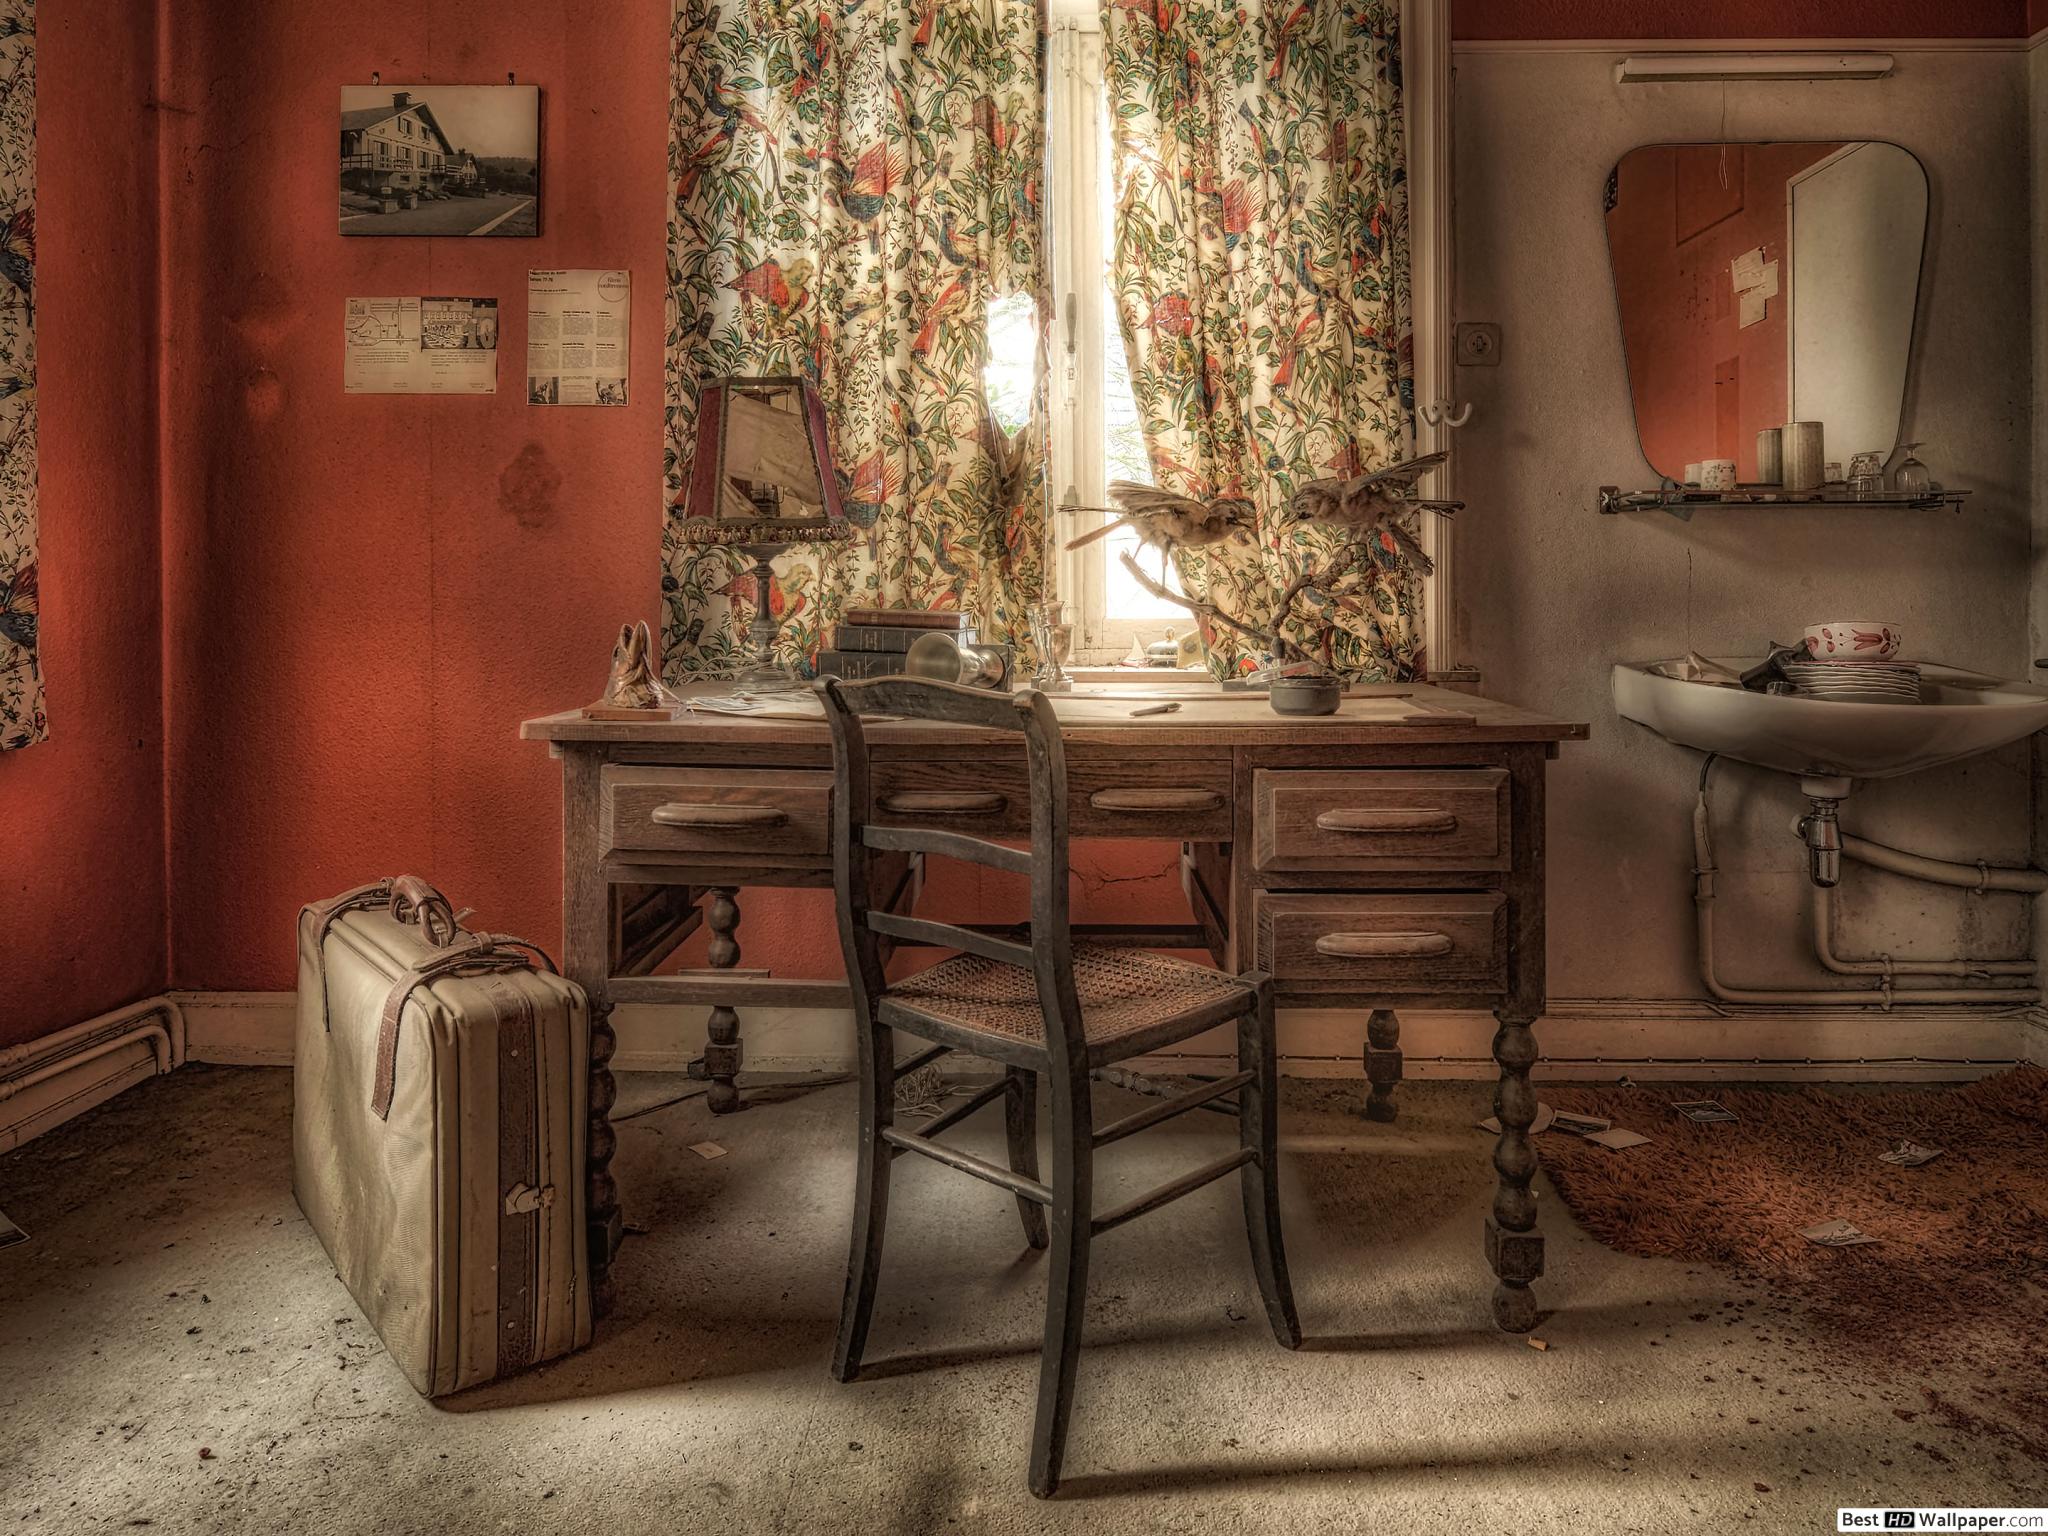 Vintage Room with old suitcase HD wallpaper download